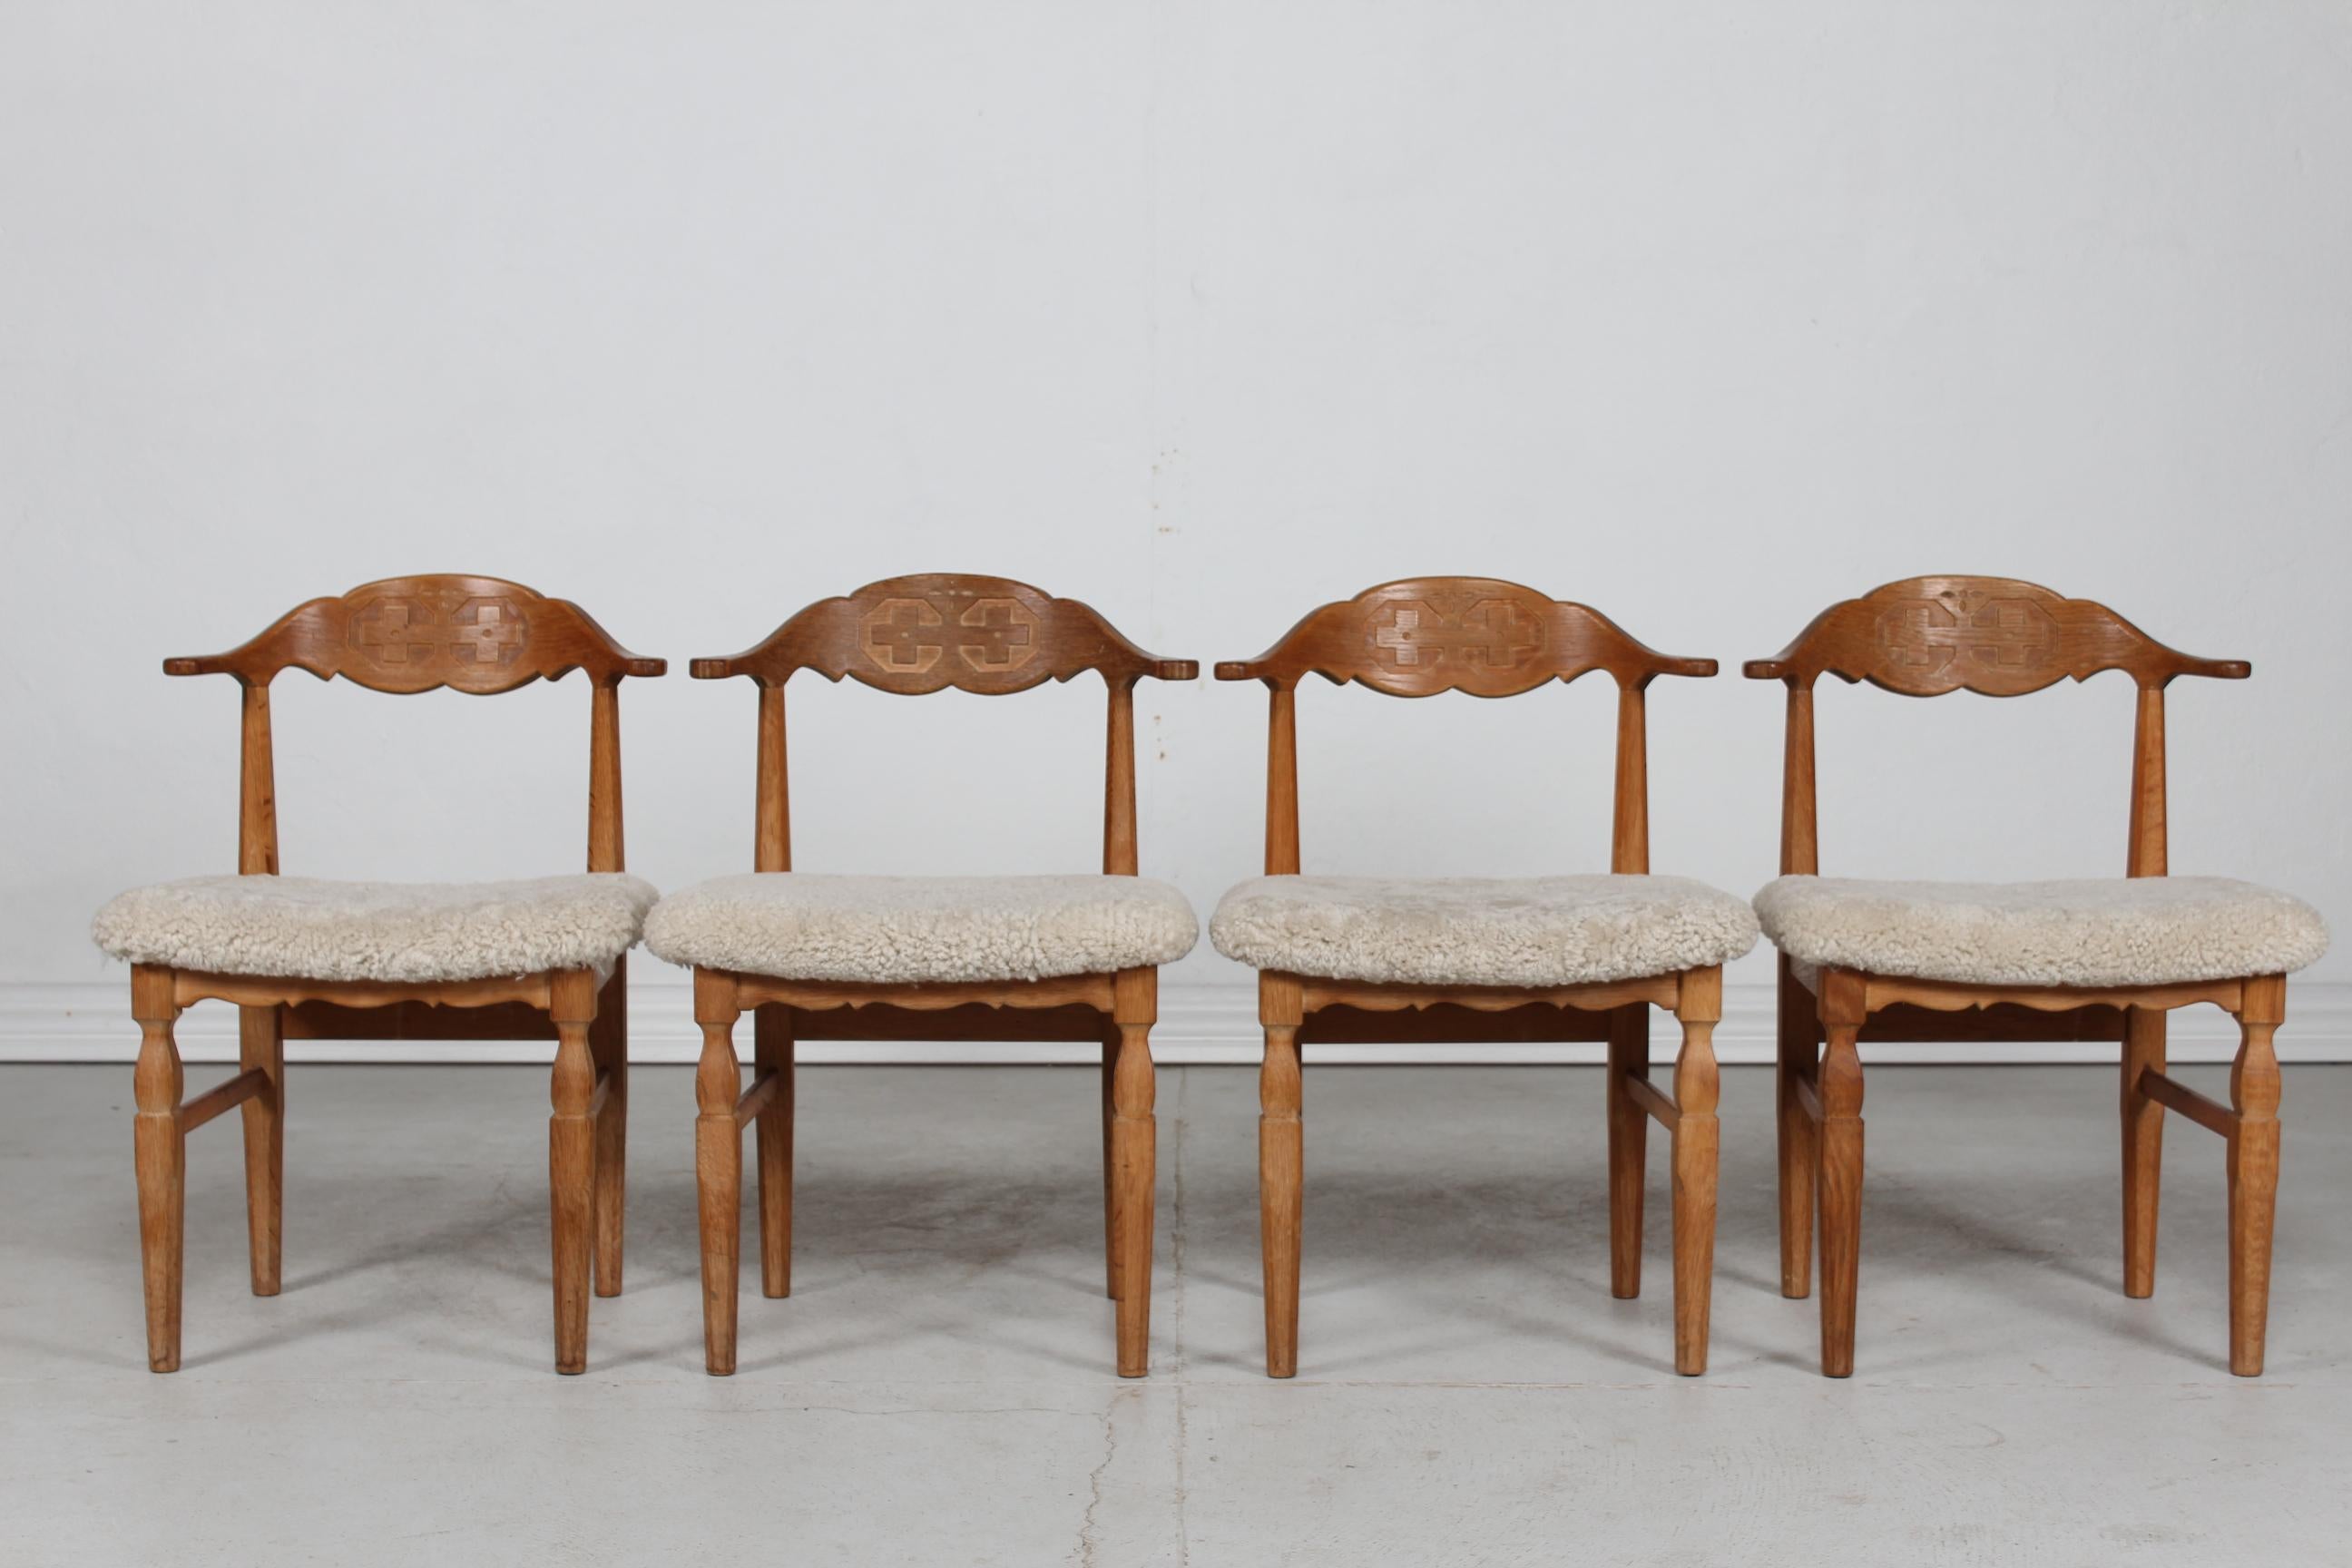 Here is a stunning set of 4 Danish vintage dinning room chairs in great country style.
They are in the line of Henning Kjærnulf razor blade style chairs
The chairs are made by a danish cabinet maker of solid oak with cow horn armrest. 
The seats